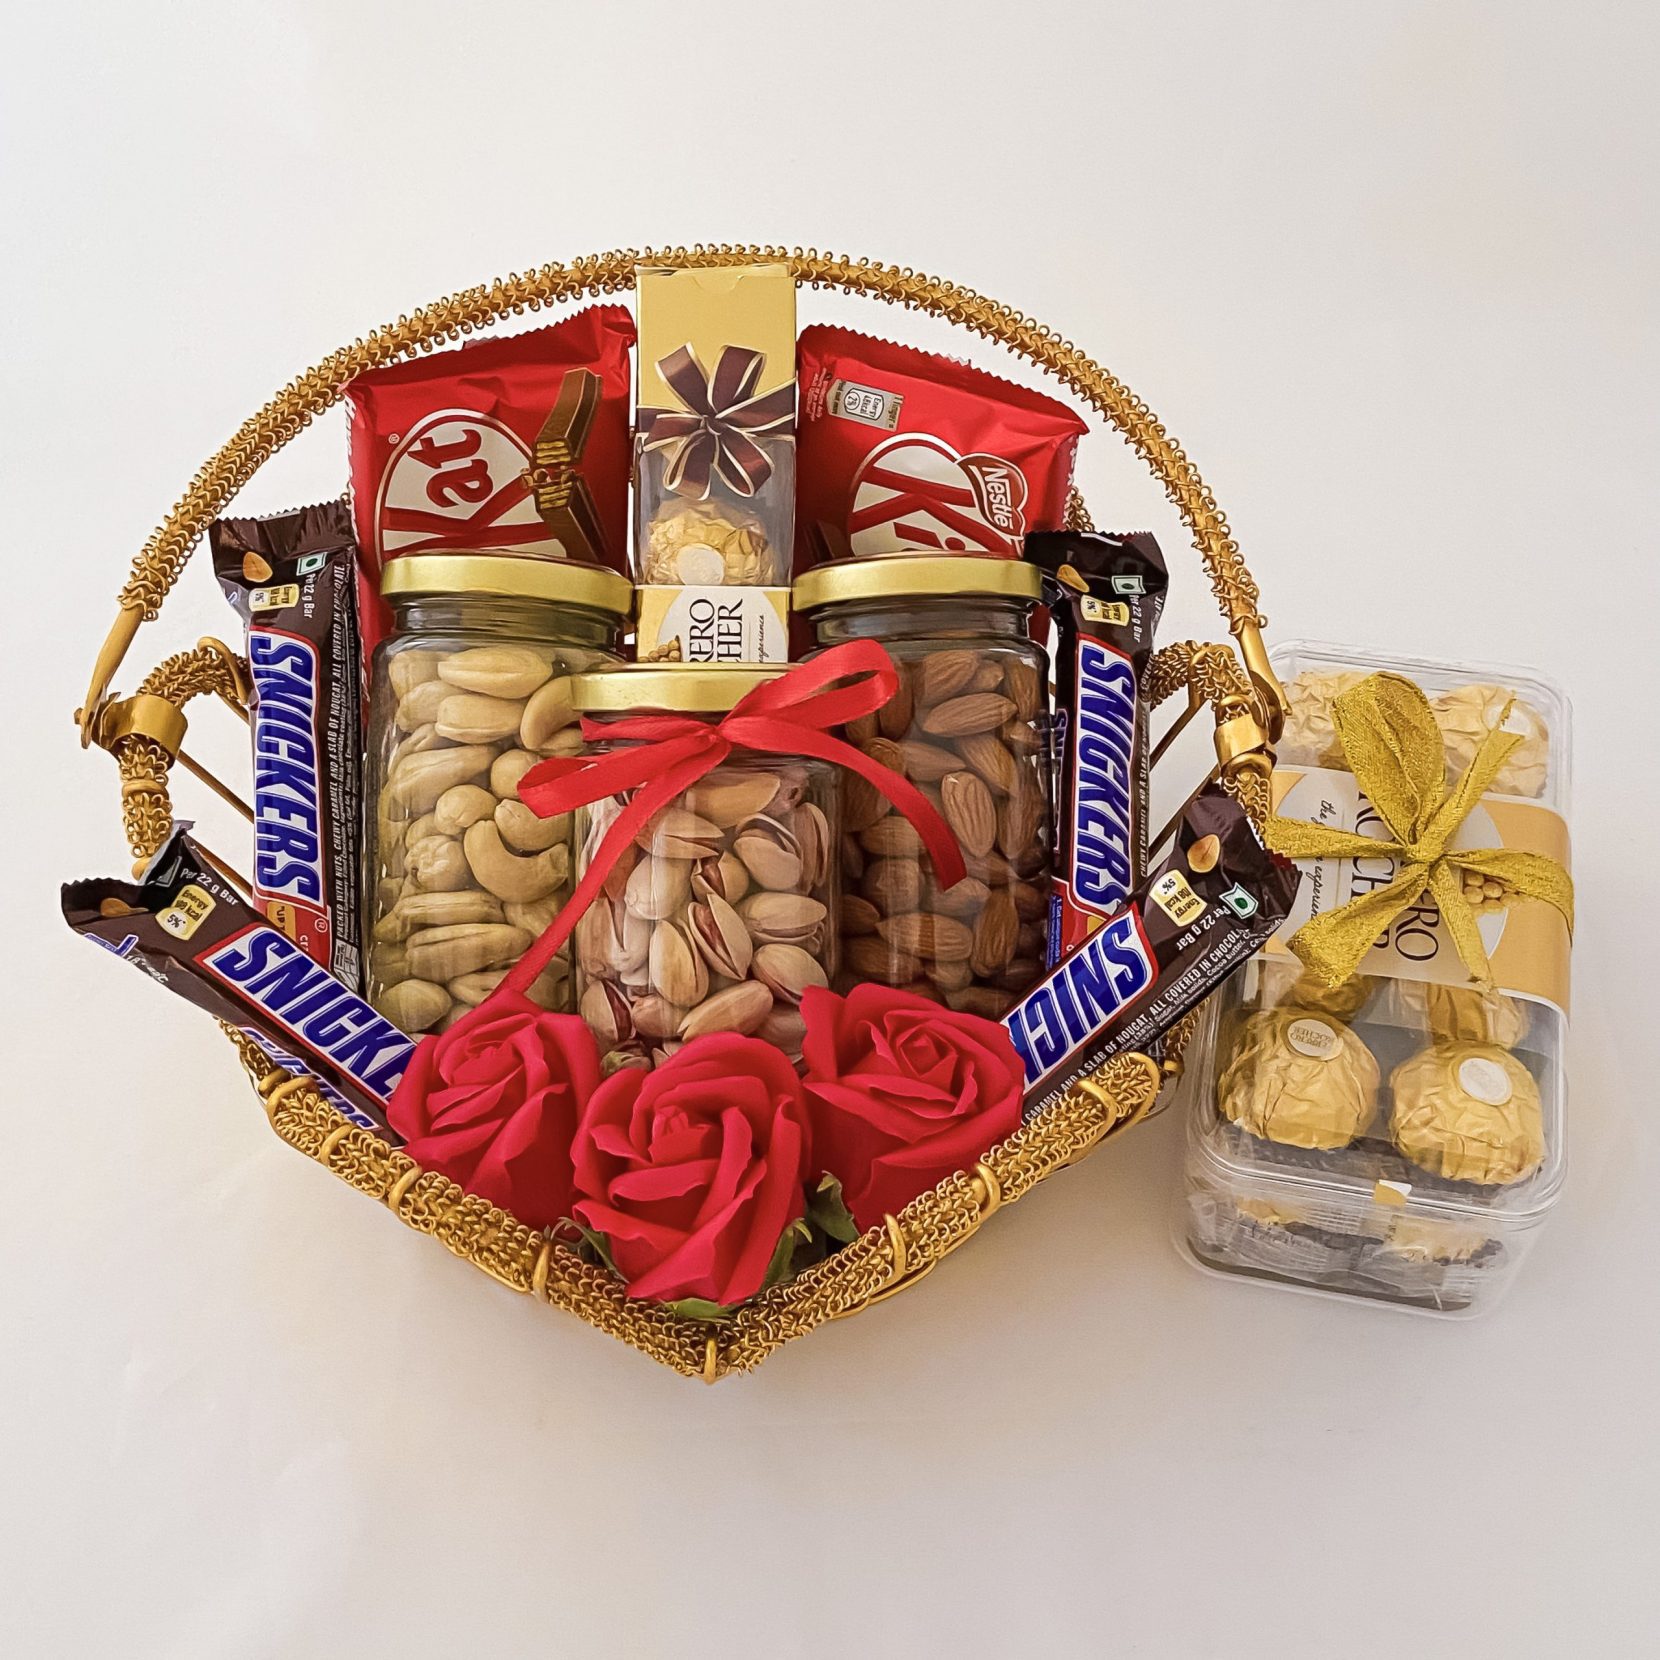 Details more than 105 nuts and spices gift box